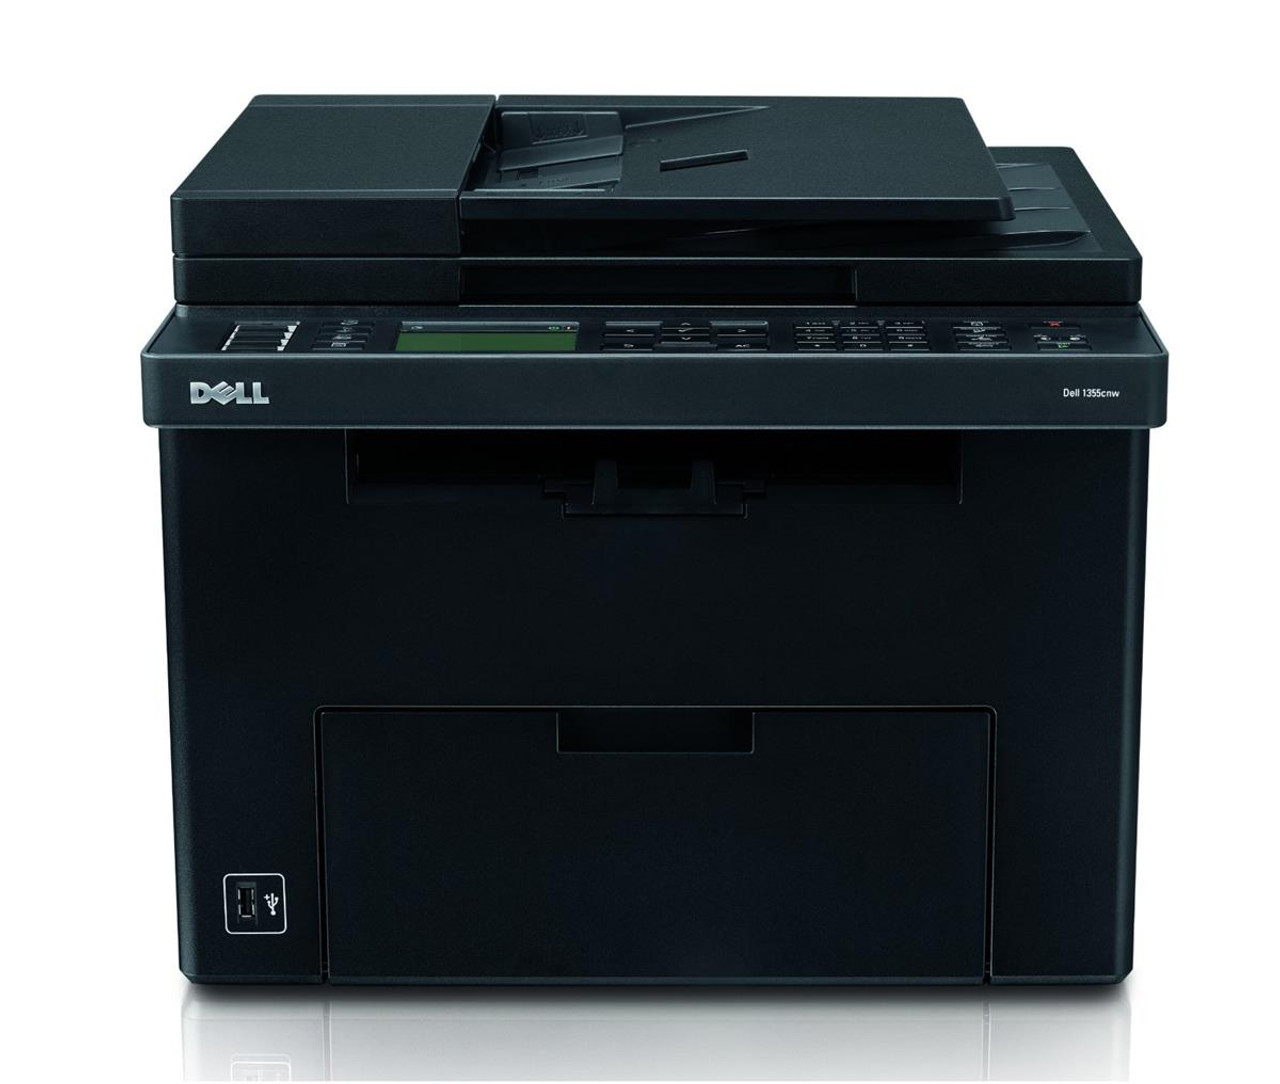 1355CNW - Dell 1355cnw Multifunction Color Printer (Refurbished)